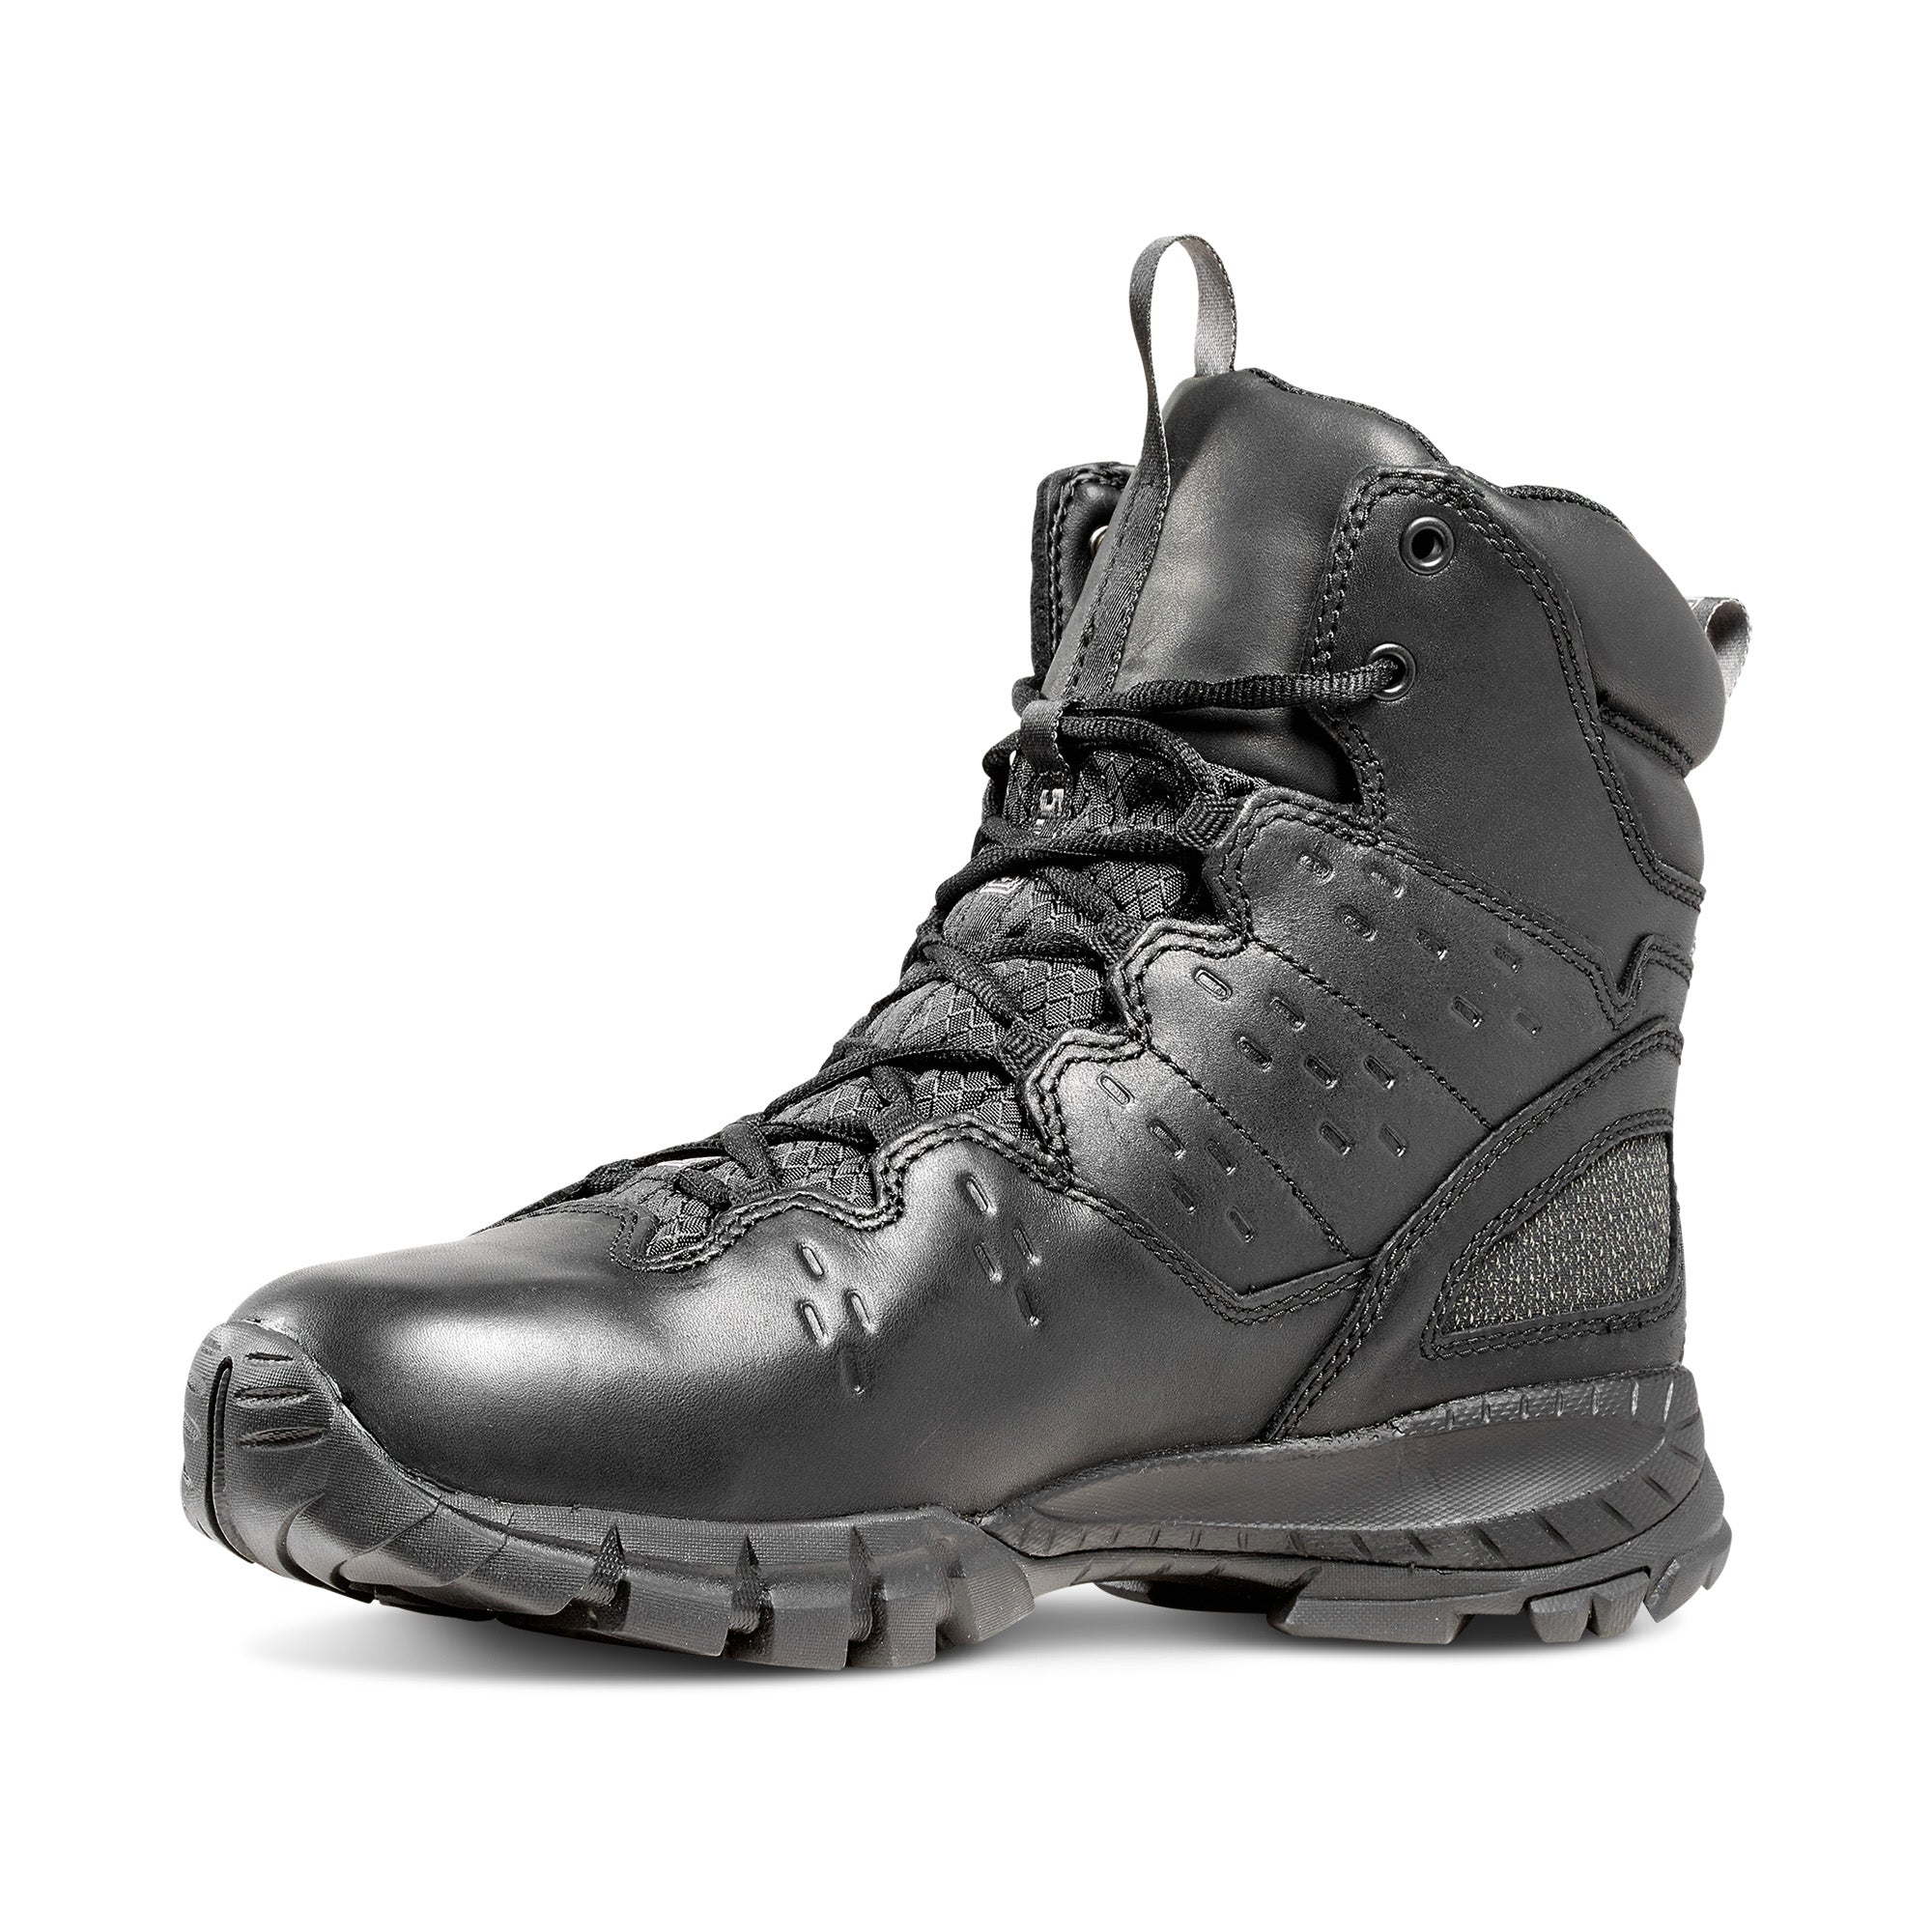 5.11 Tactical XPRT 3.0 Waterproof 6 Inches Boot | Tactical Gear Australia Tactical Gear